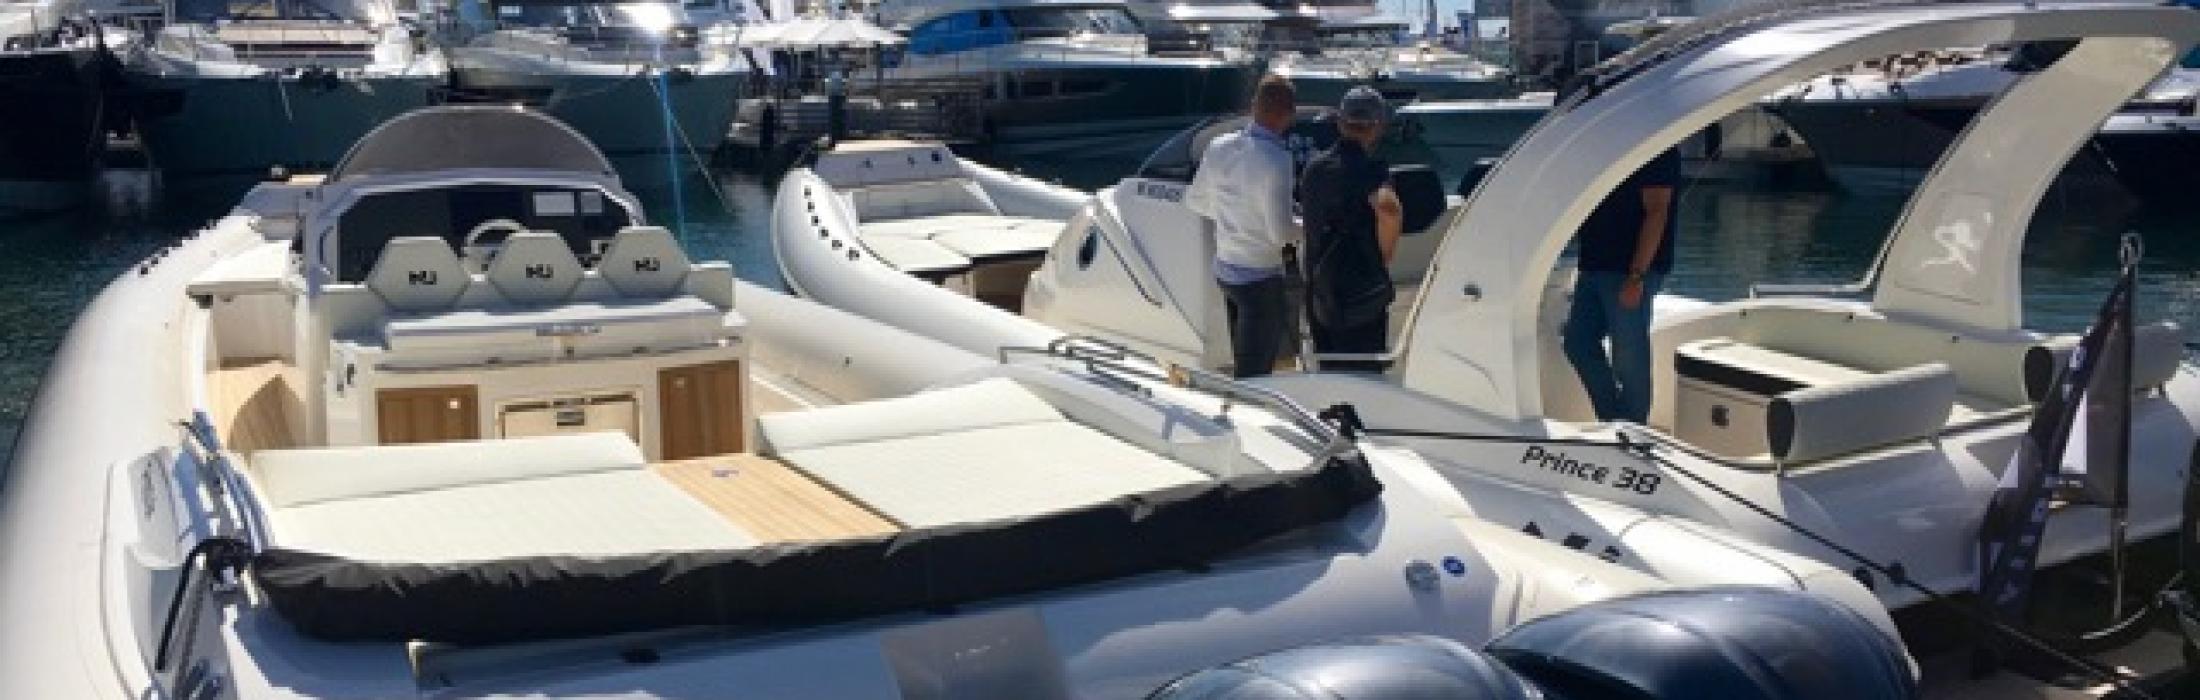 Nuova Jolly at the latest Cannes Yachting Festival